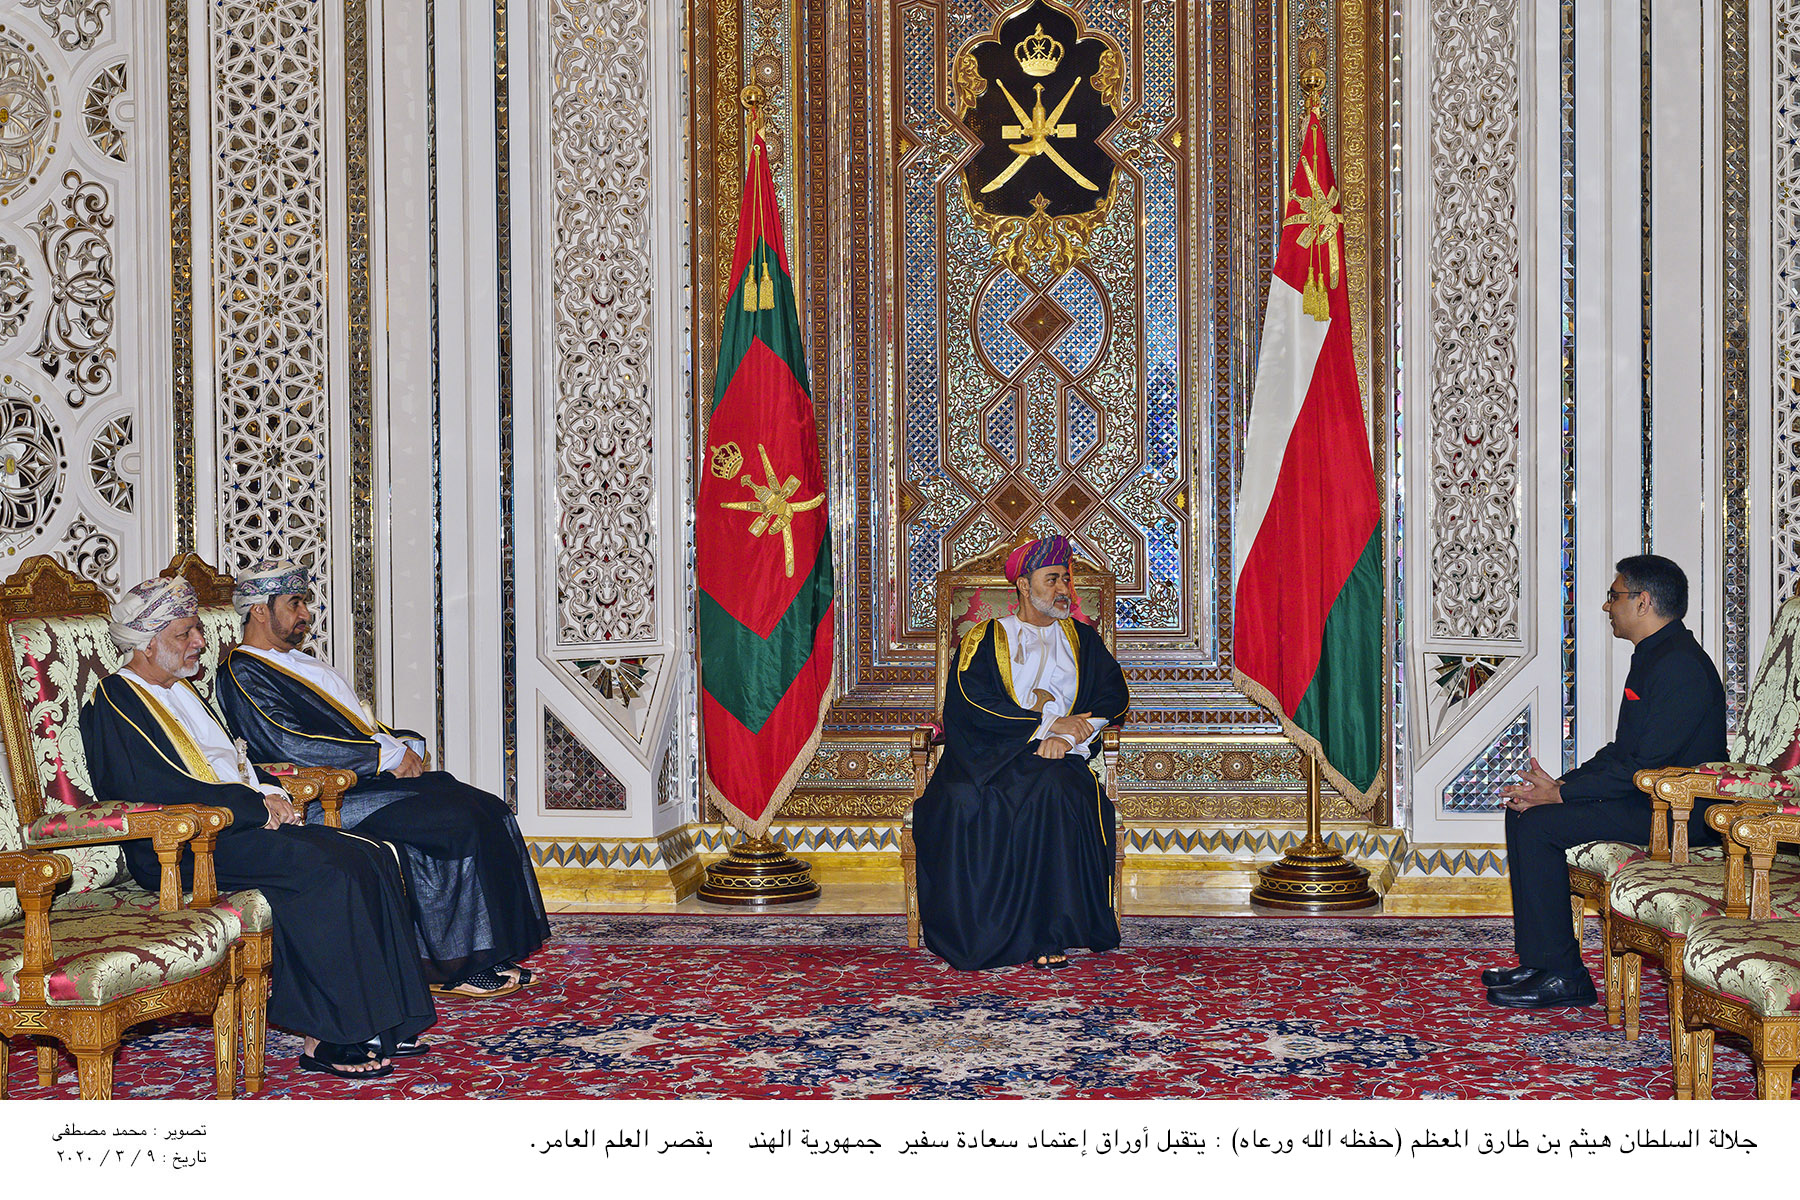 His Majesty the Sultan receives credentials of ambassadors